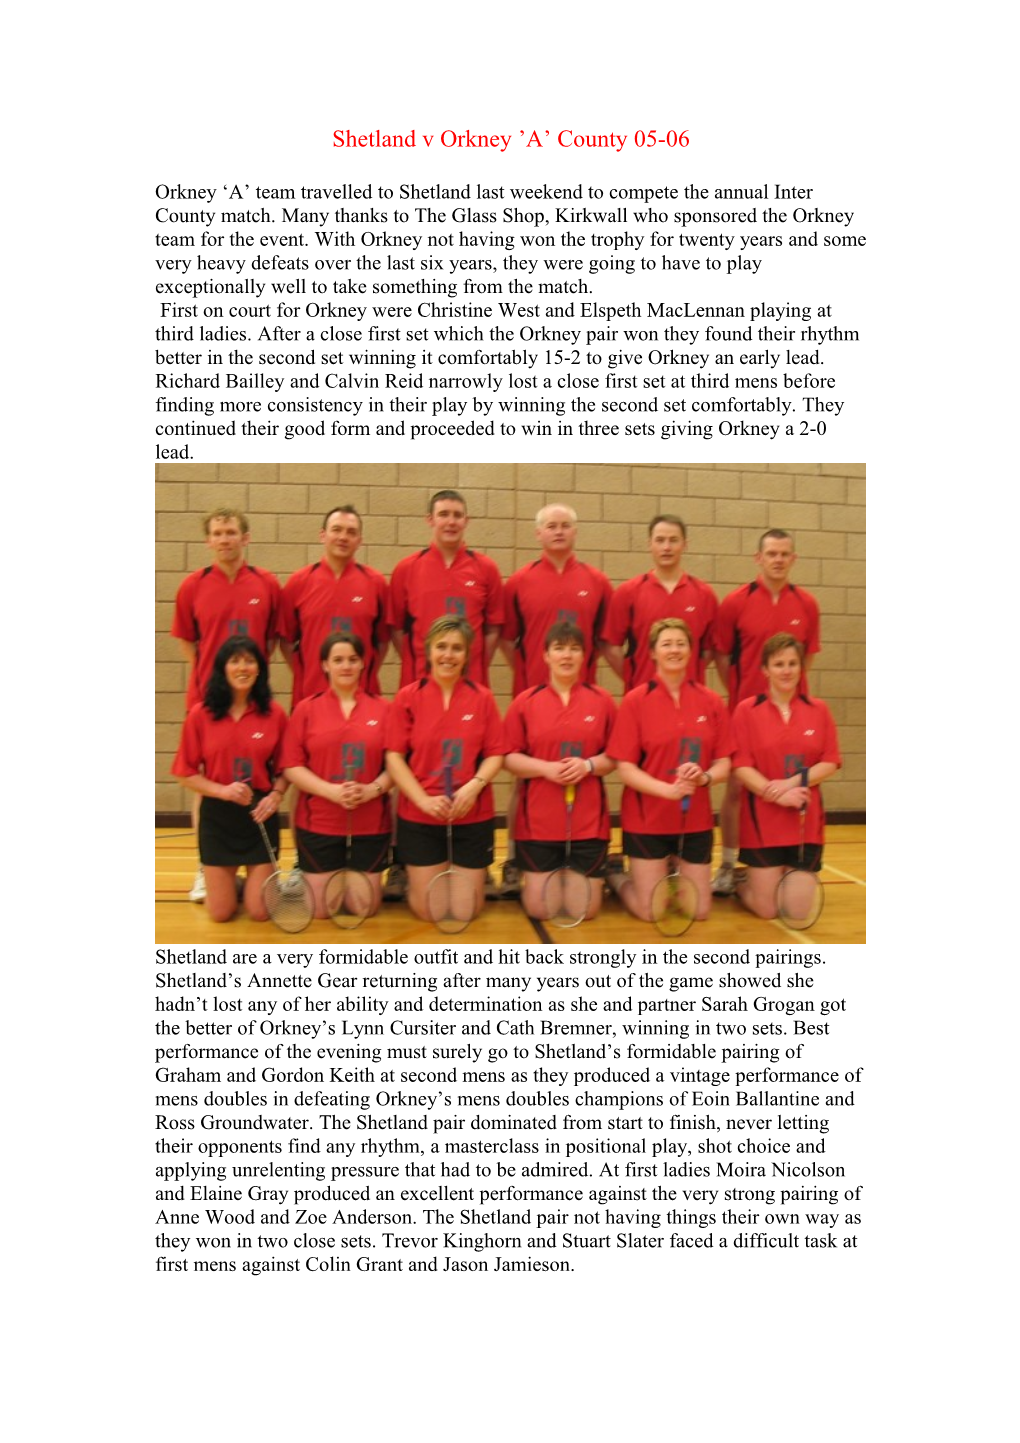 Orkney a Team Travelled to Shetland Last Weekend to Compete the Annual Inter County Match